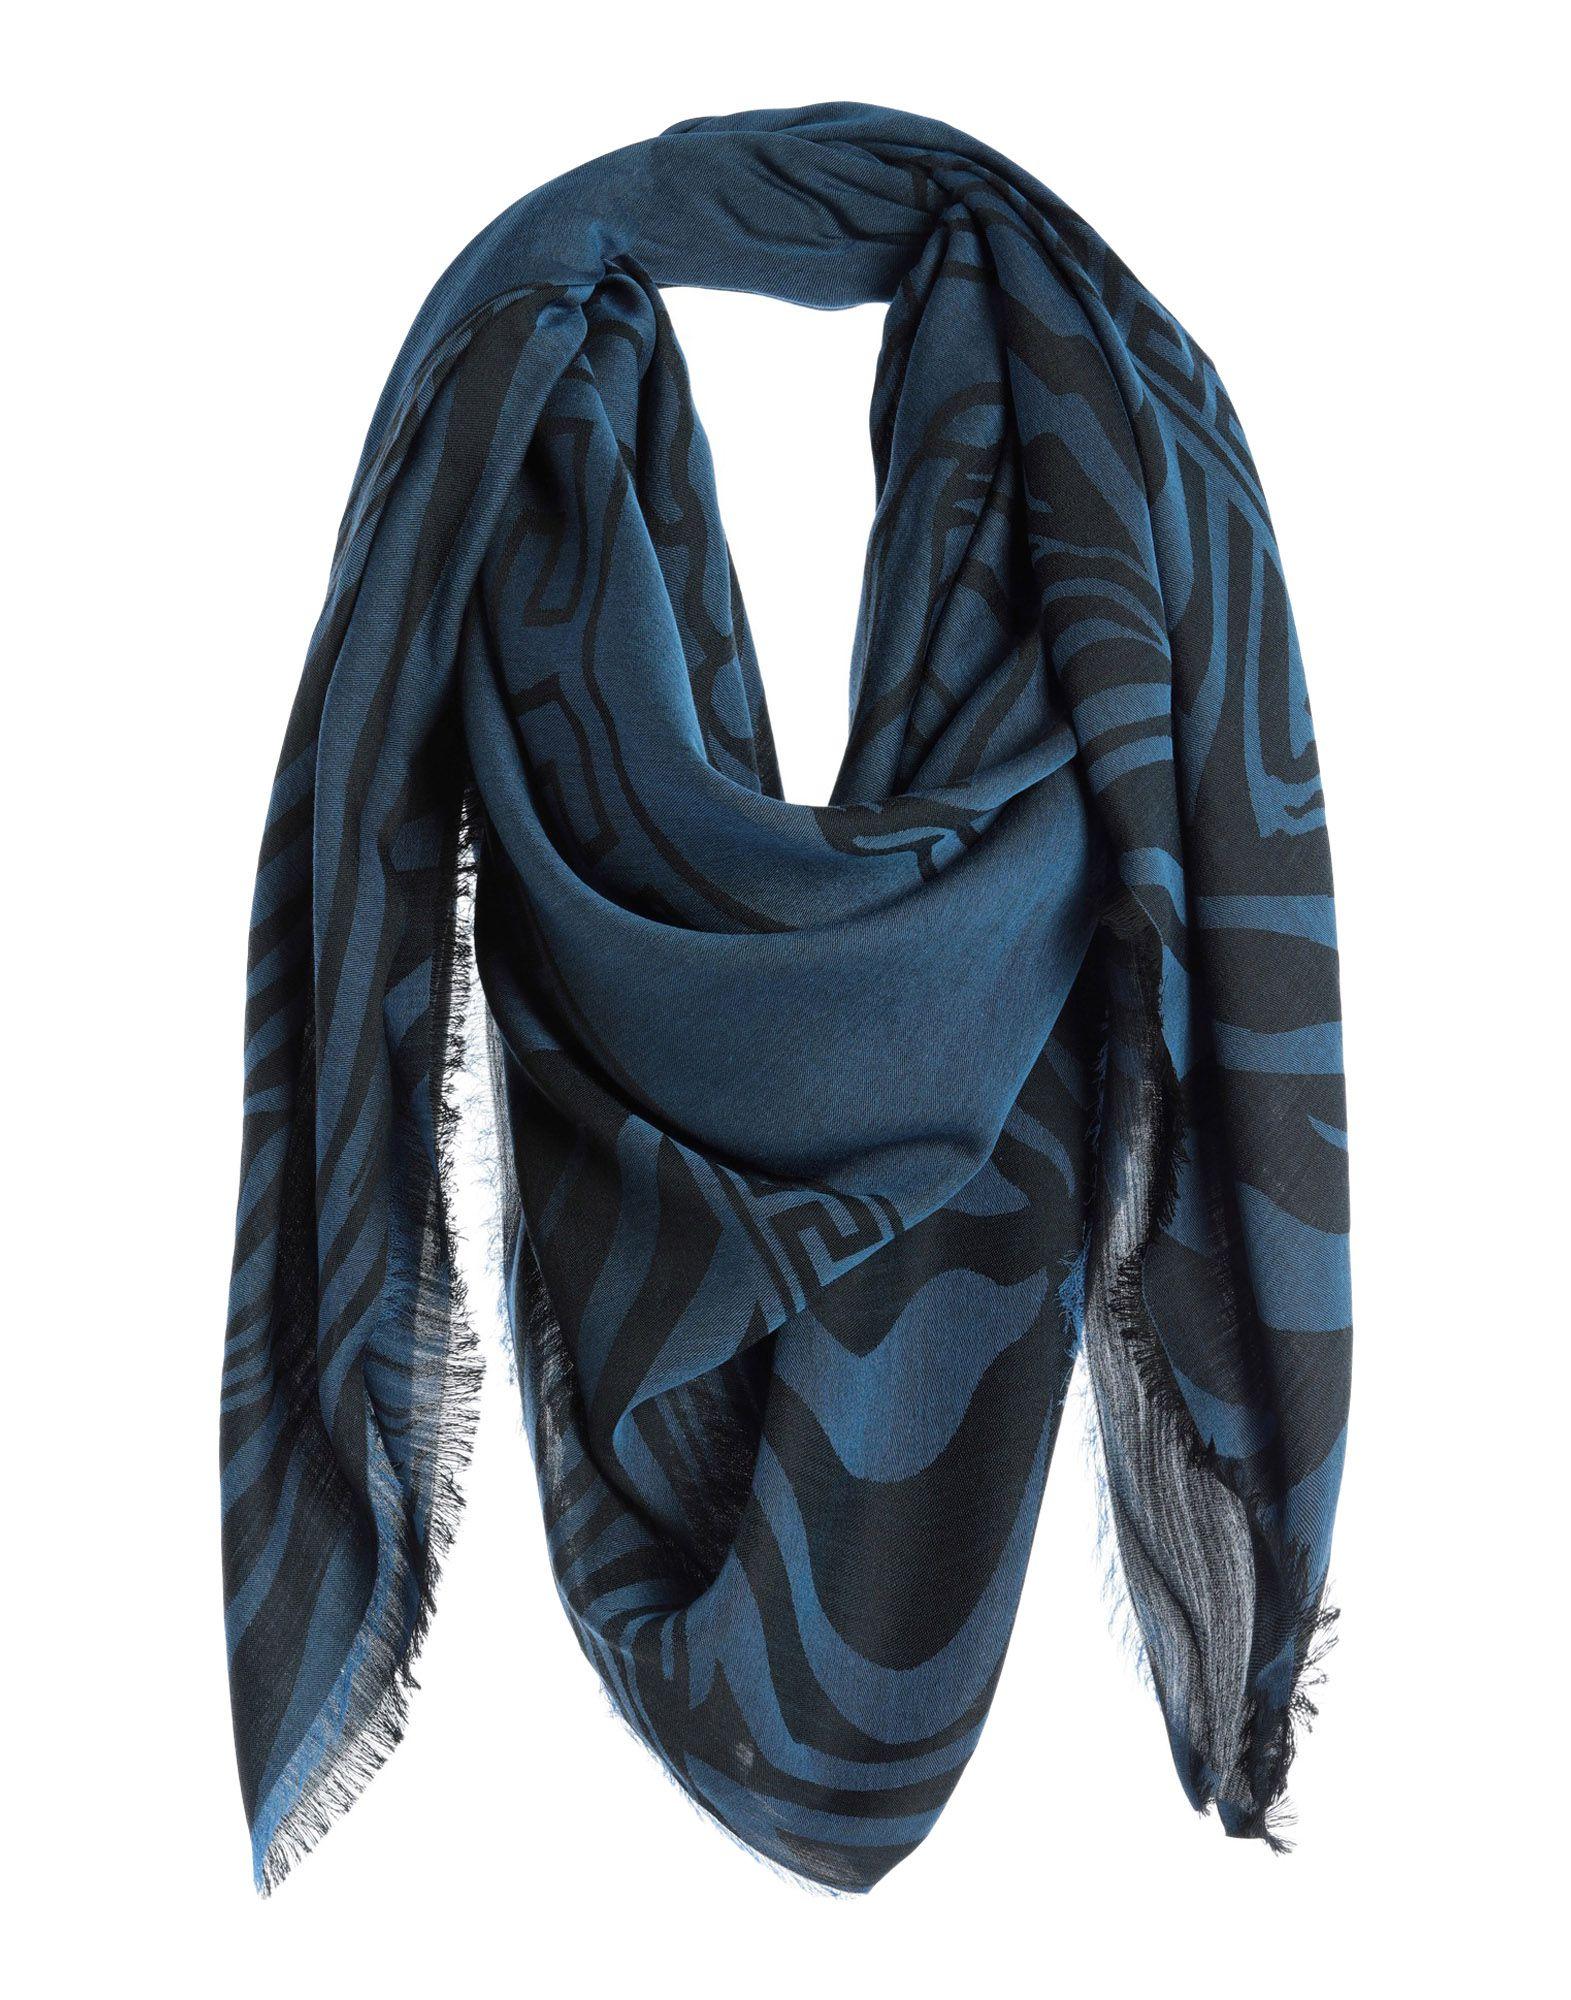 Versace Square Scarf in Blue for Men - Lyst